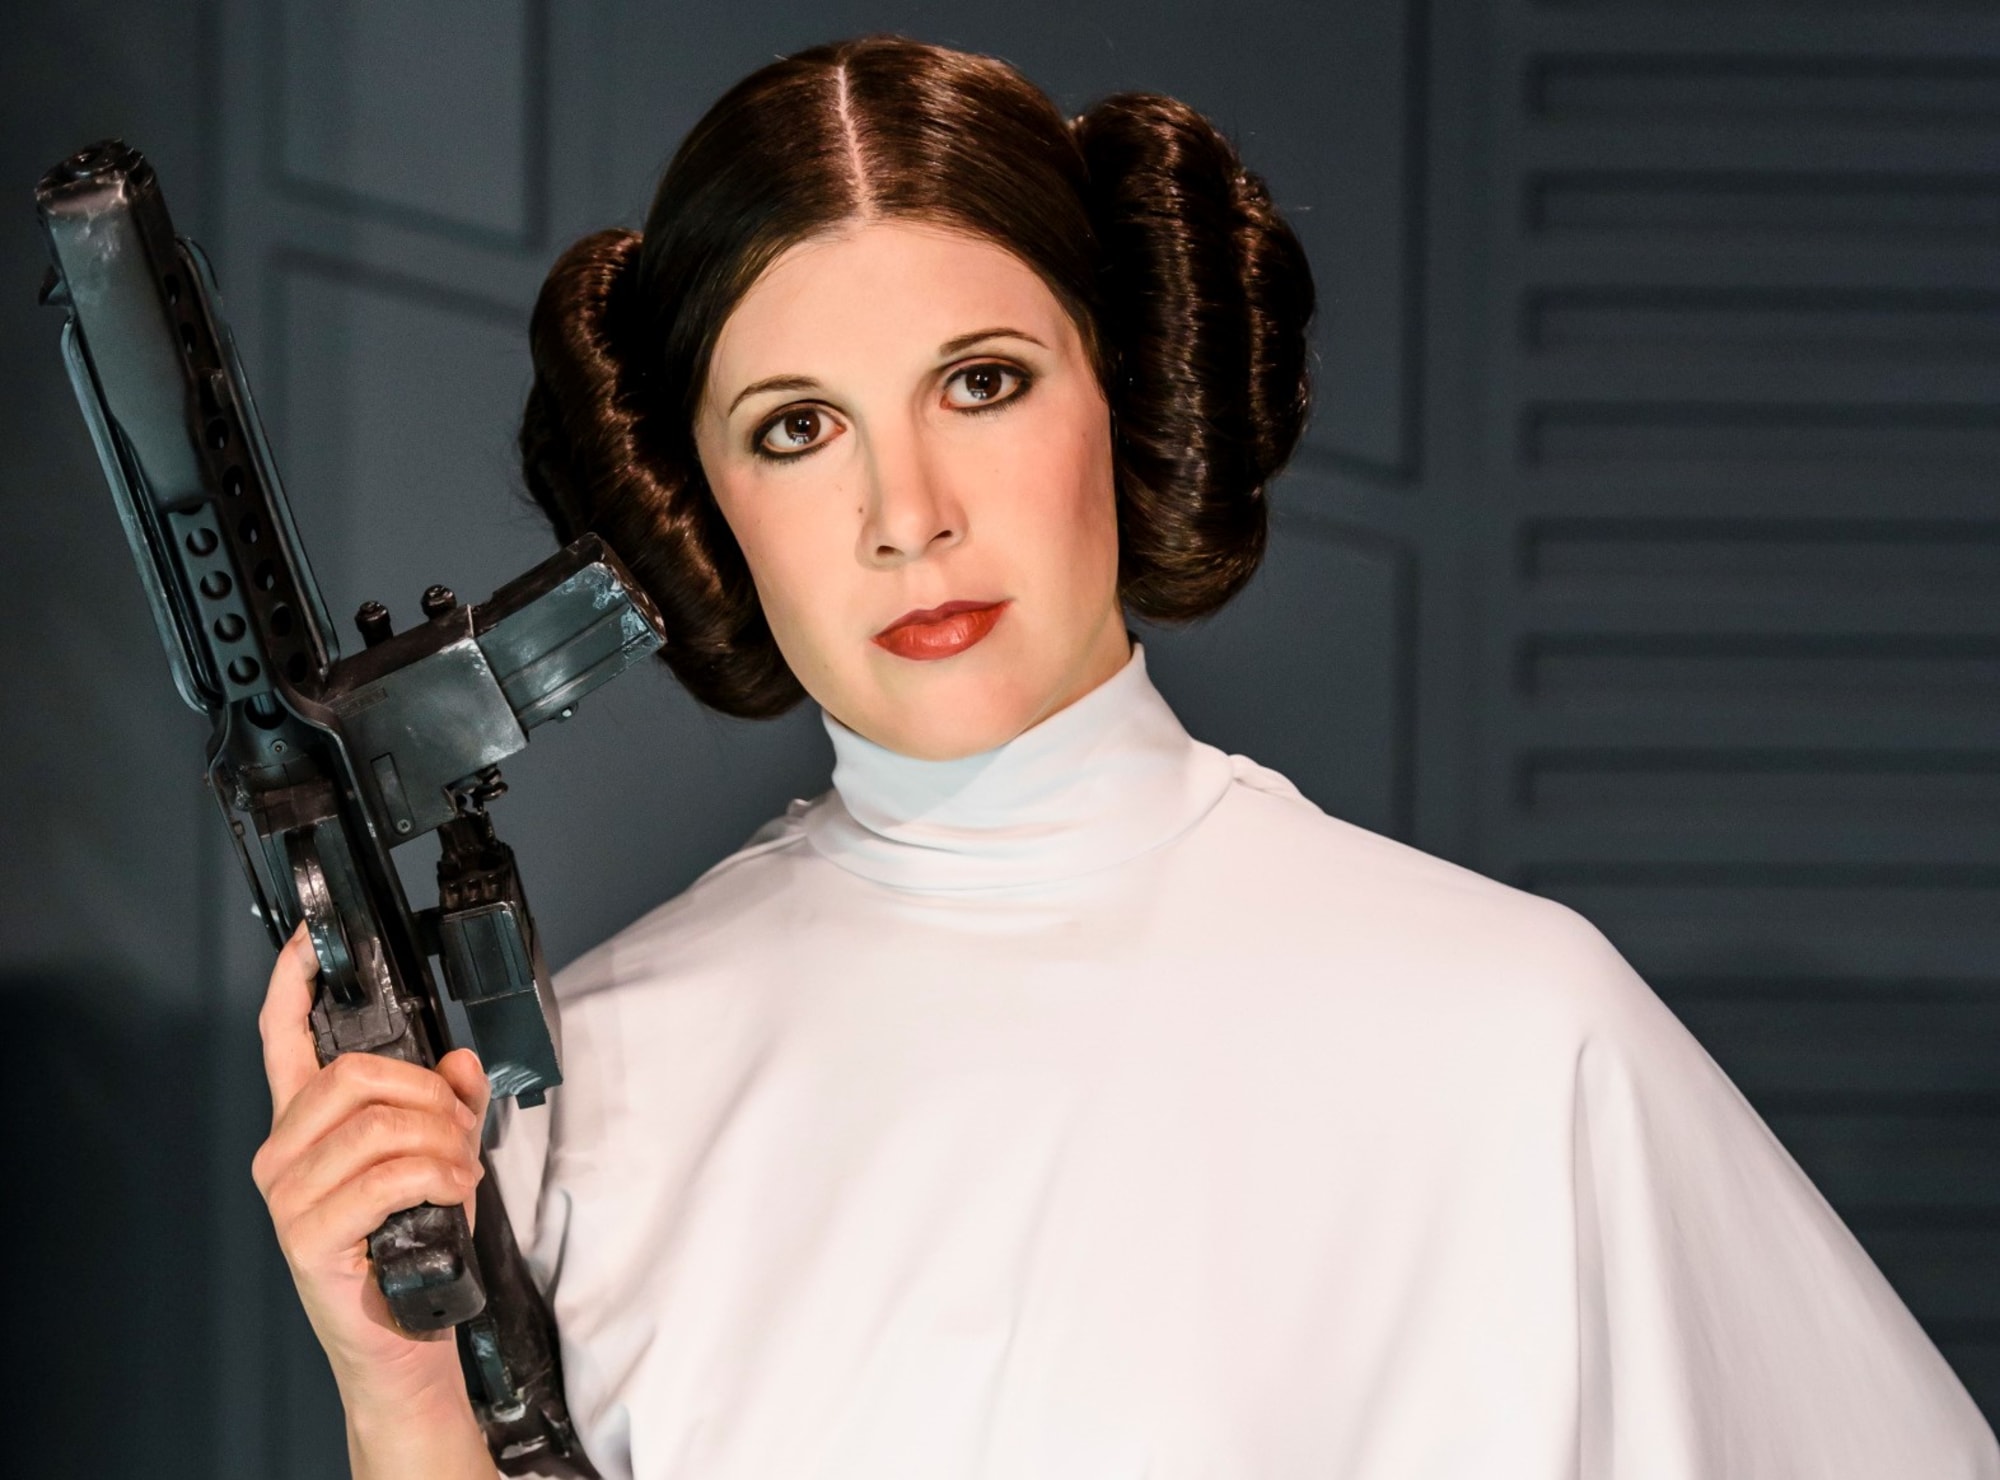 Princess Leia Carrie Fisher Fans Sign Petition Calling For Star Wars Character Princess Leia